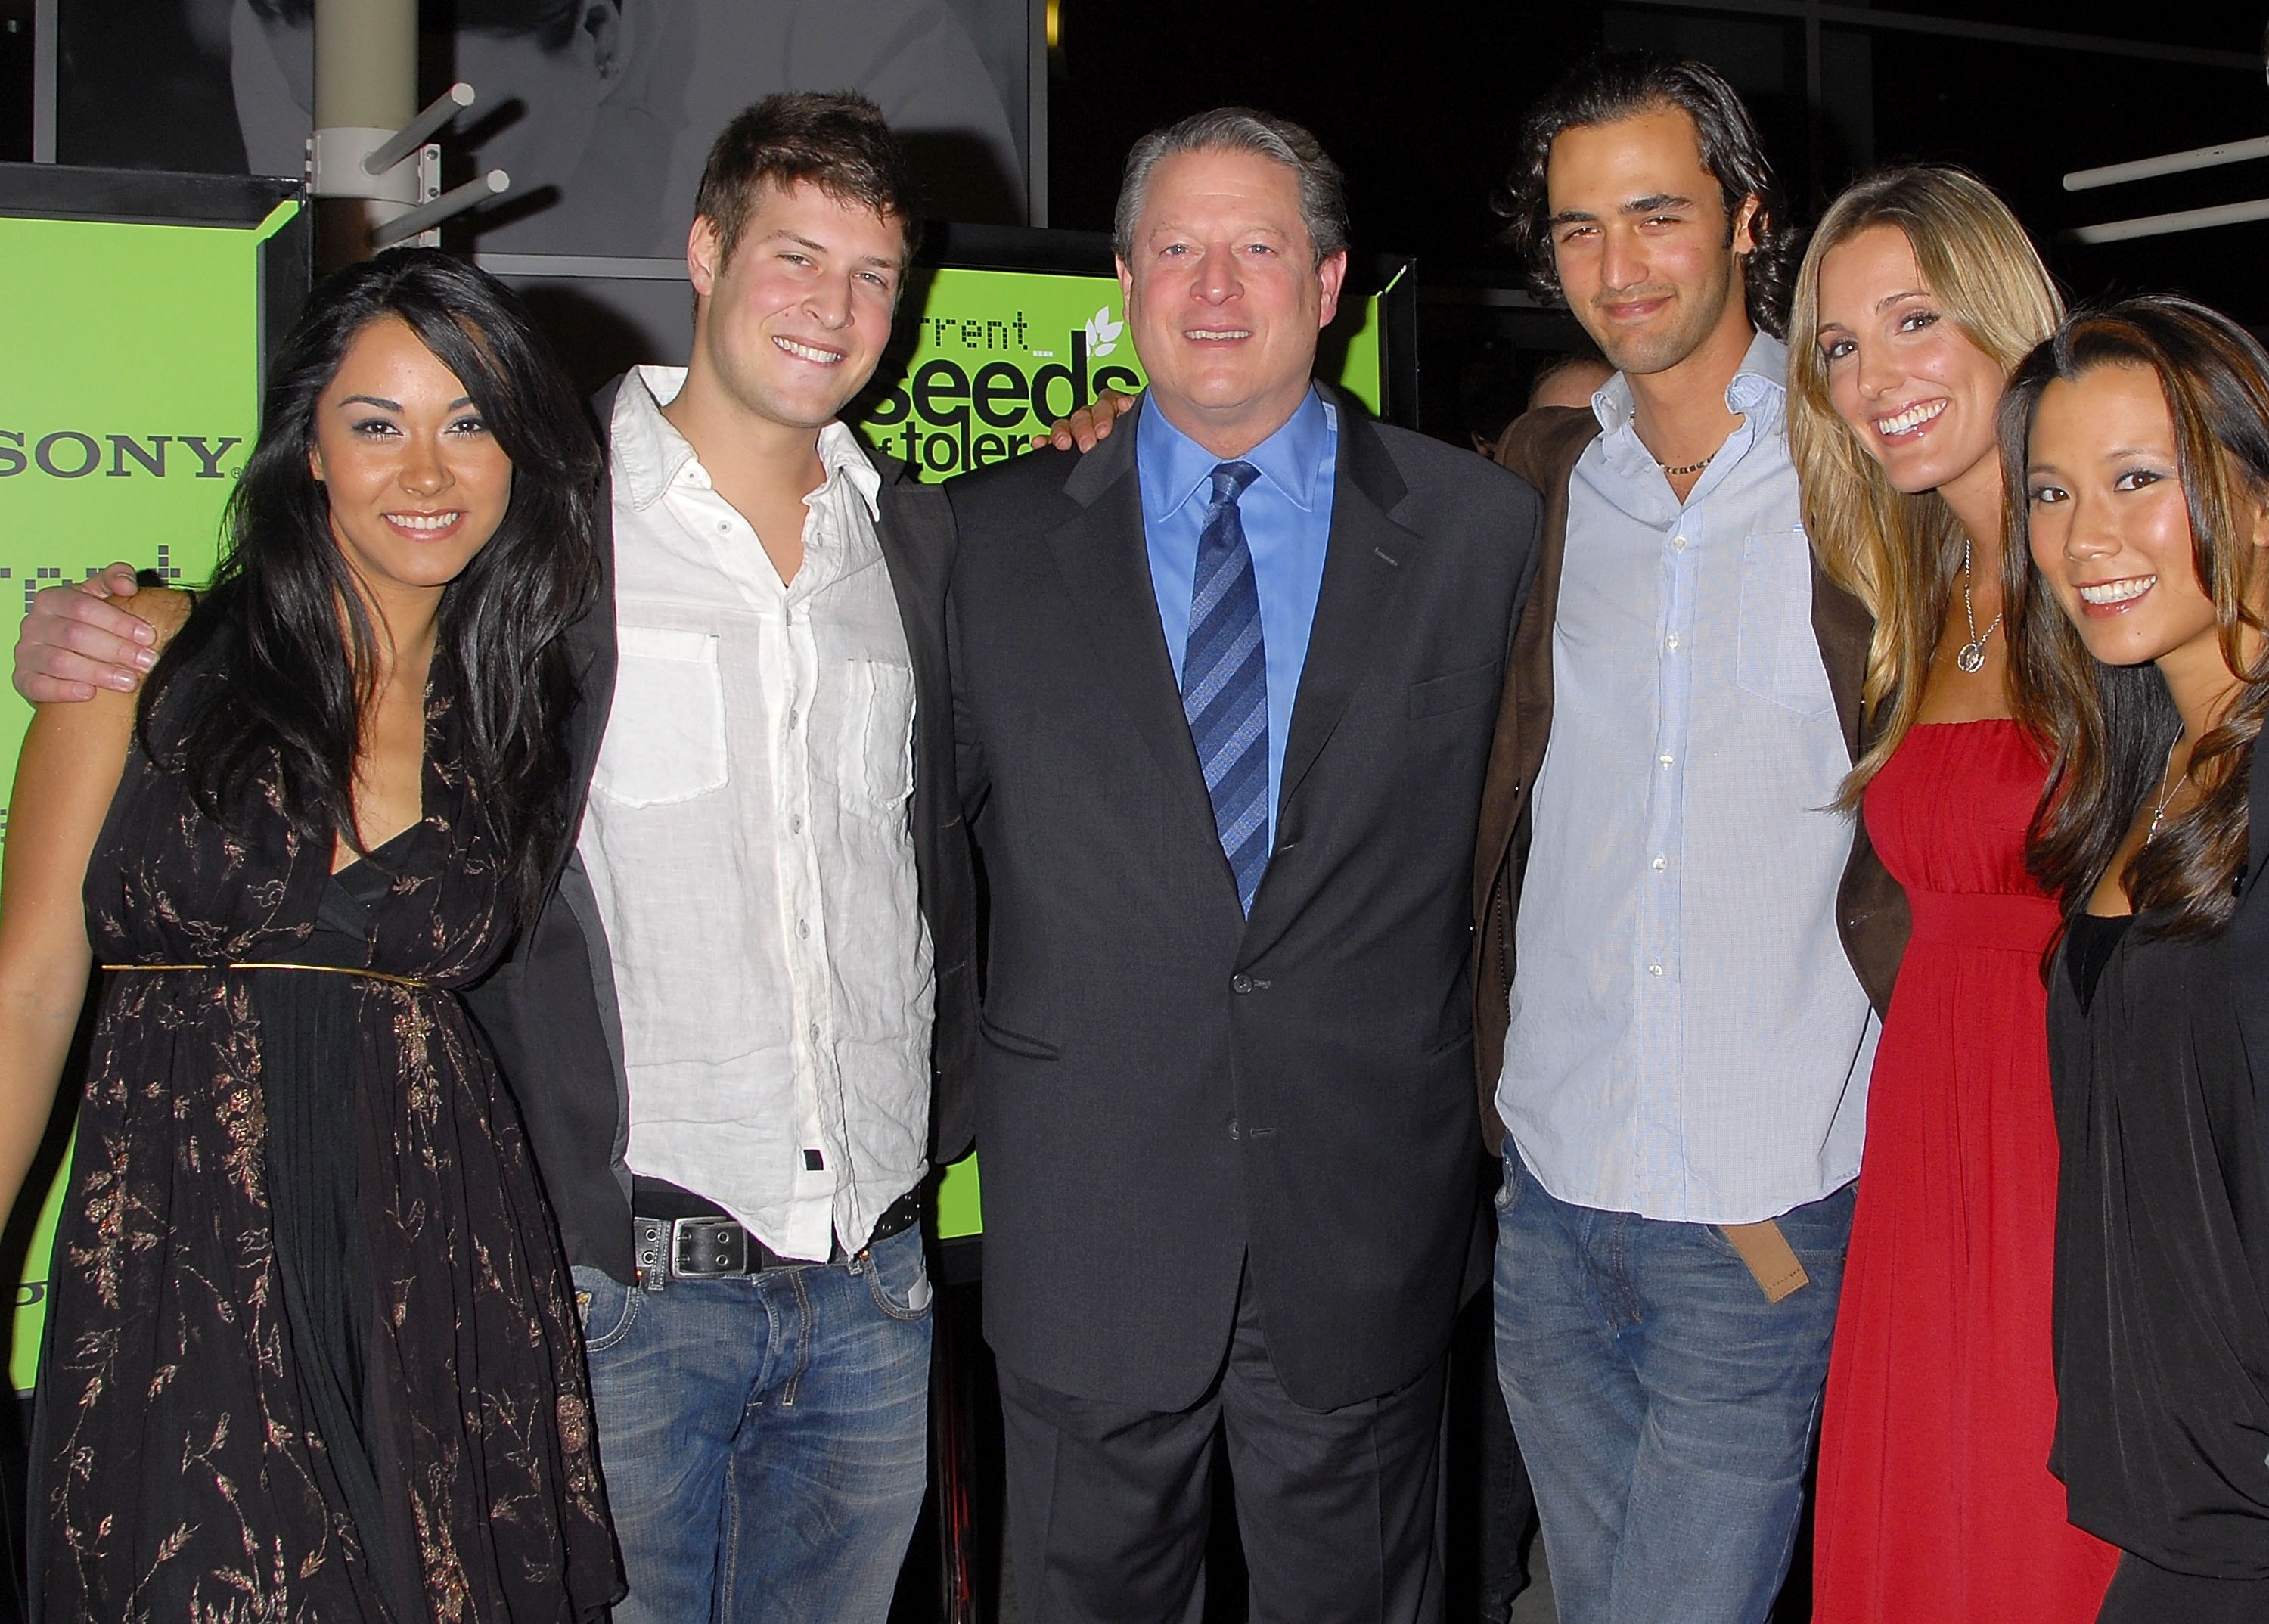 LOS ANGELES, CA - DECEMBER 14: Current TV Chairman and former Vice-President Al Gore joins Current TV hosts Jael de Pardo (L), Max Lugavere, Jason Silva, Crystal Fambrini, and Angela Sun, at the 'Seeds of Tolerance' award ceremony at the ArcLigh